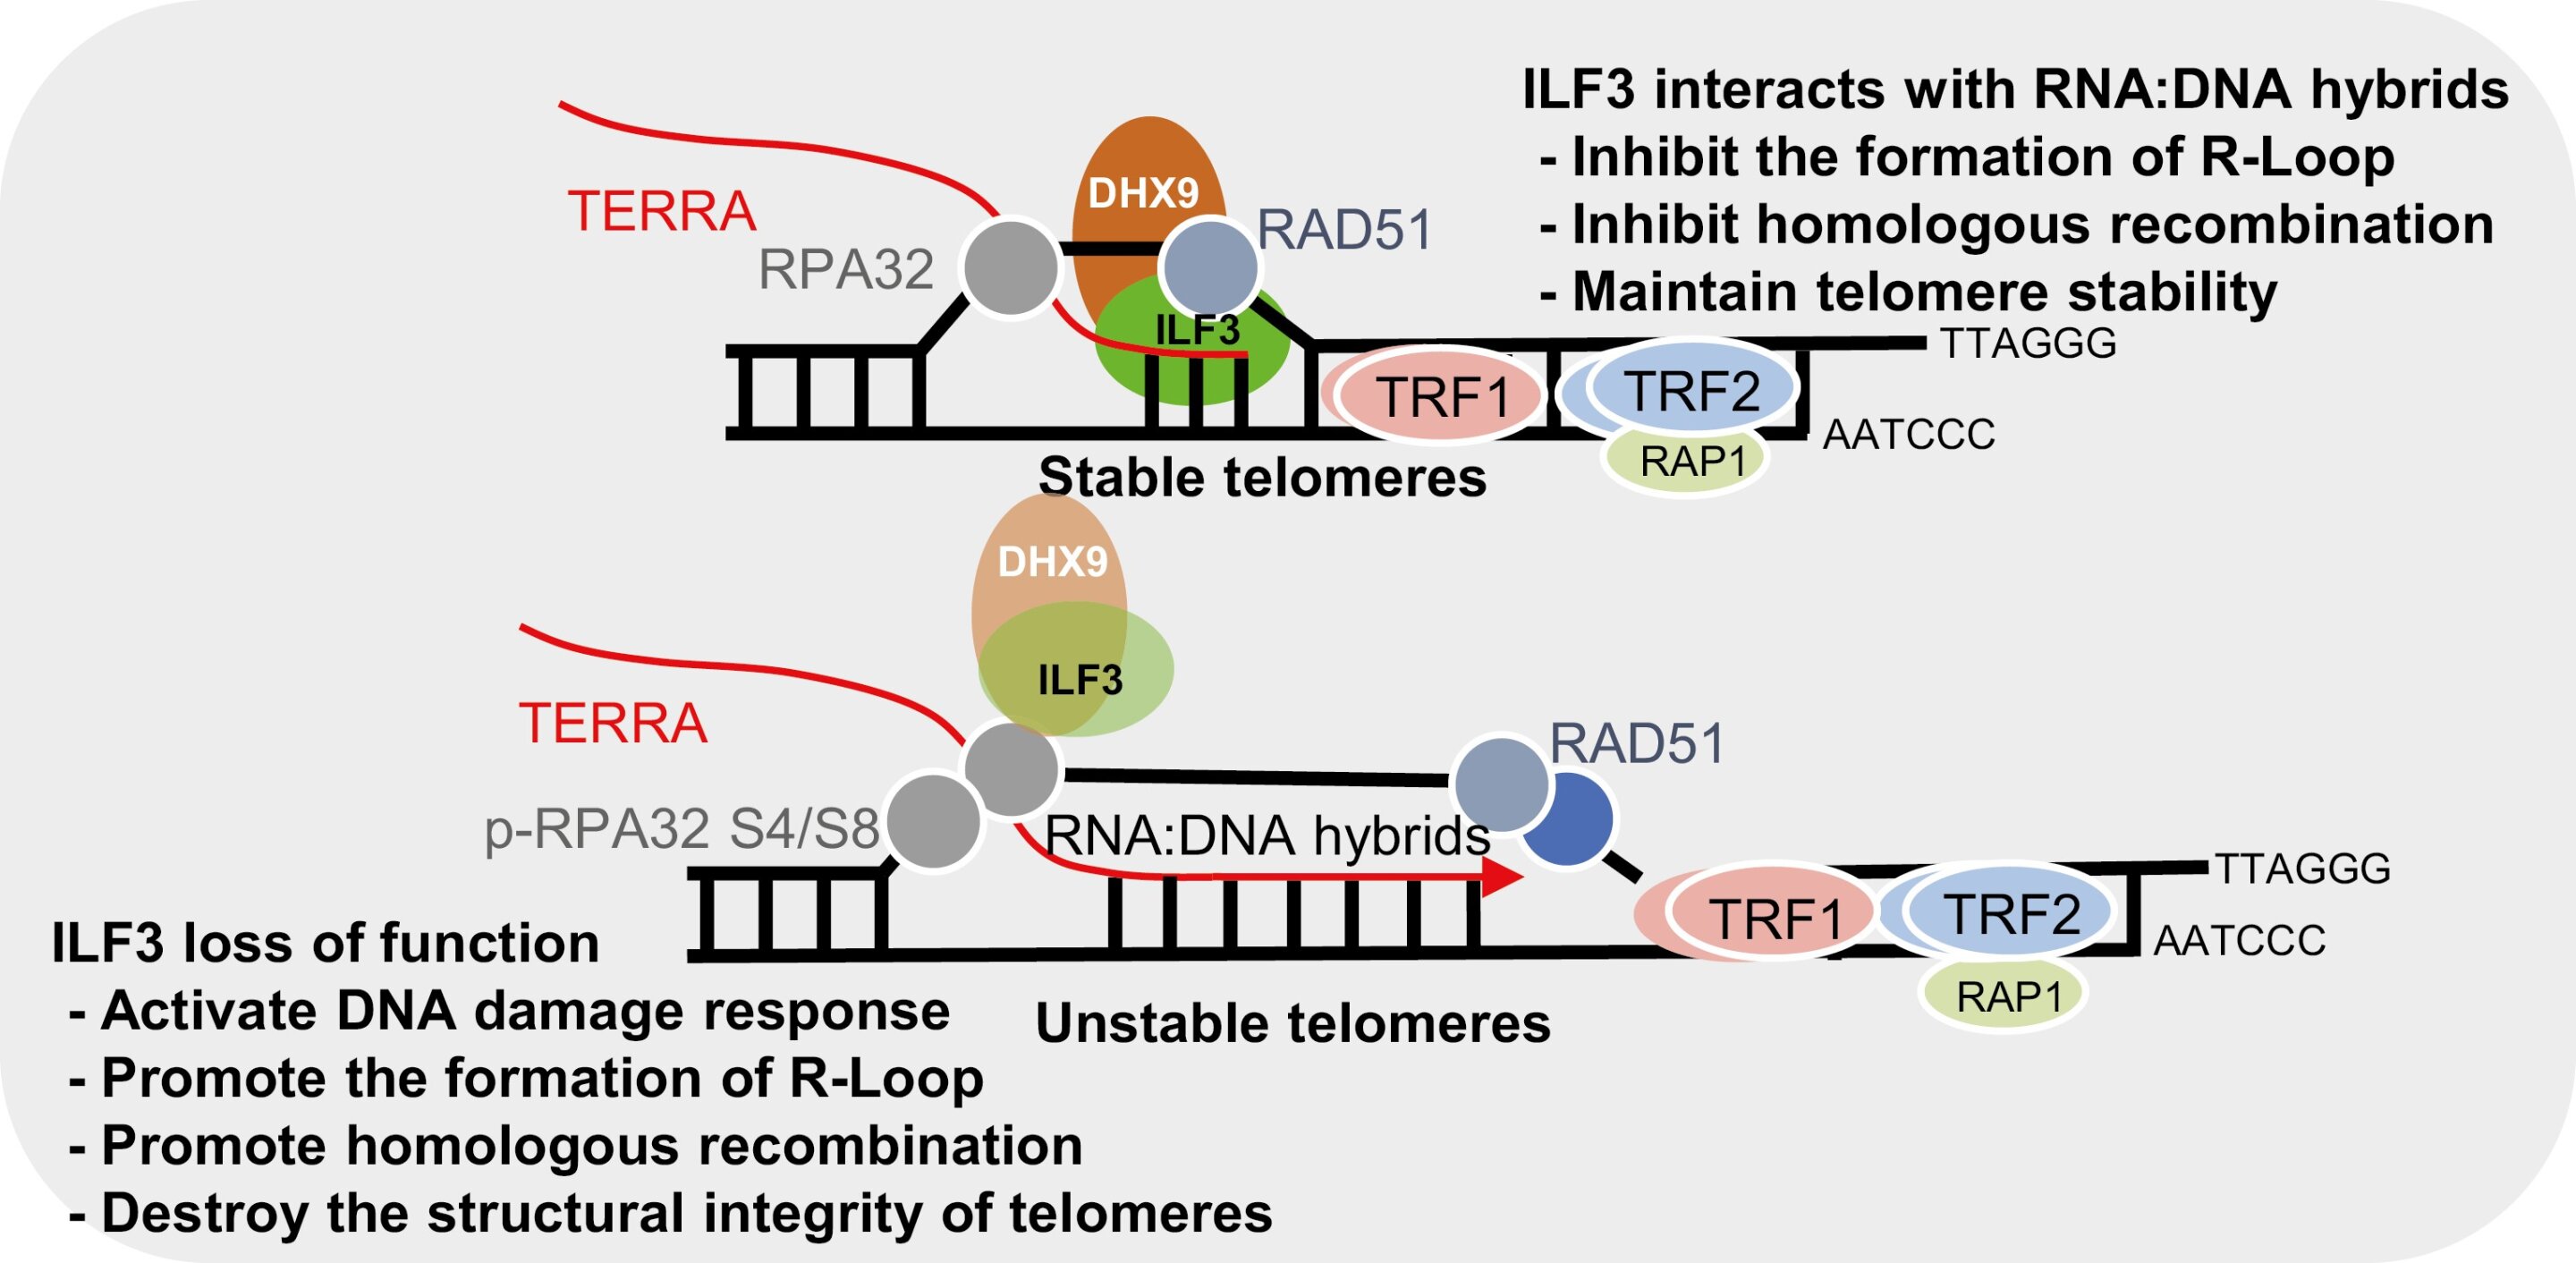 #Findings suggest ILF3 may function as a reader of telomeric R-loops to help maintain telomere homeostasis